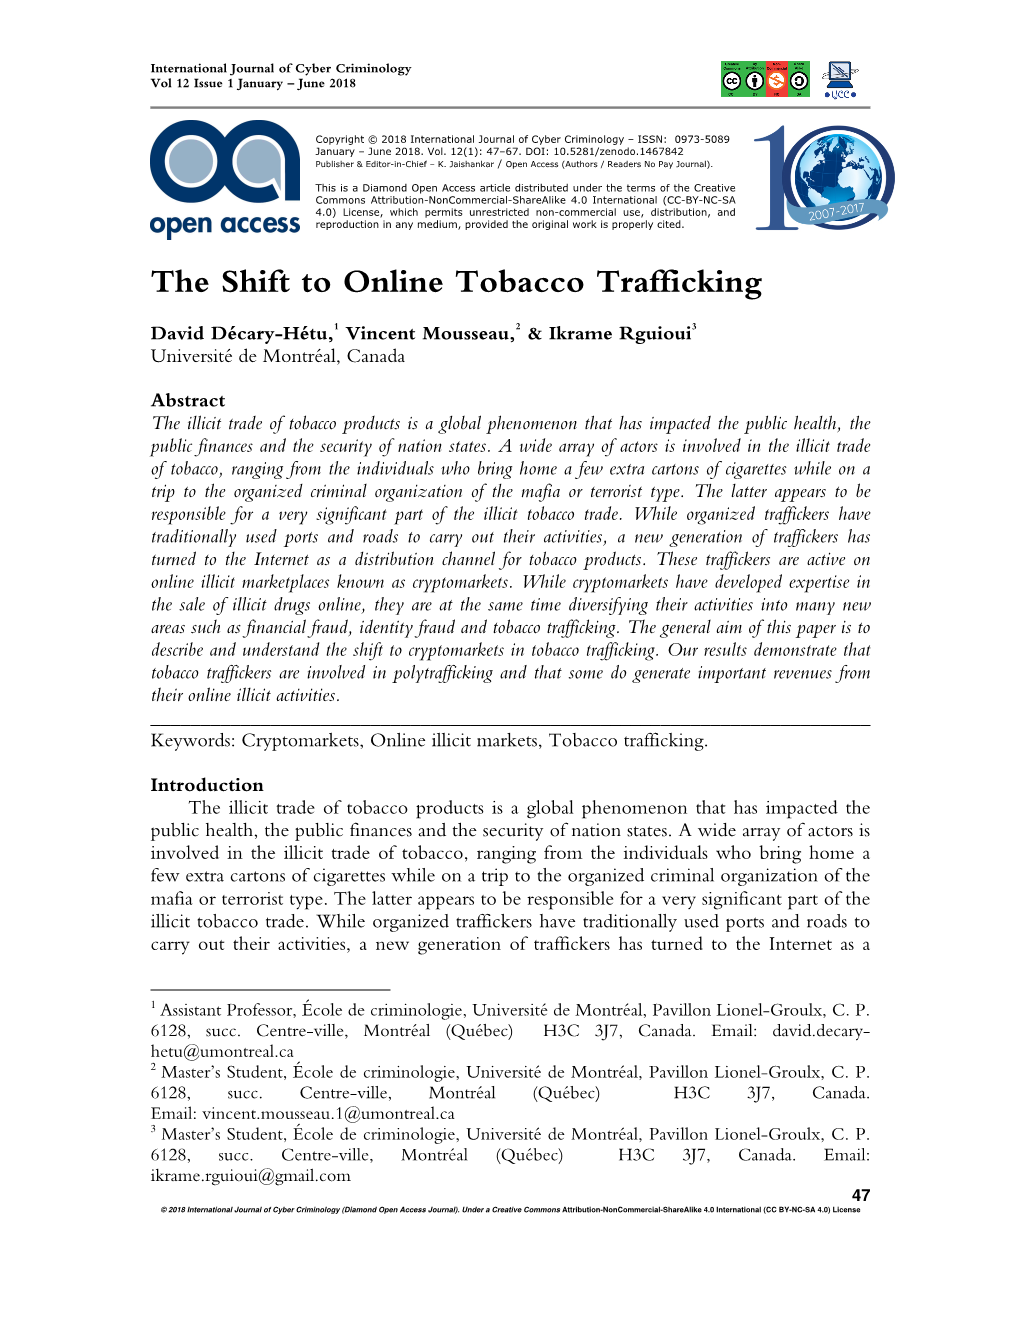 The Shift to Online Tobacco Trafficking